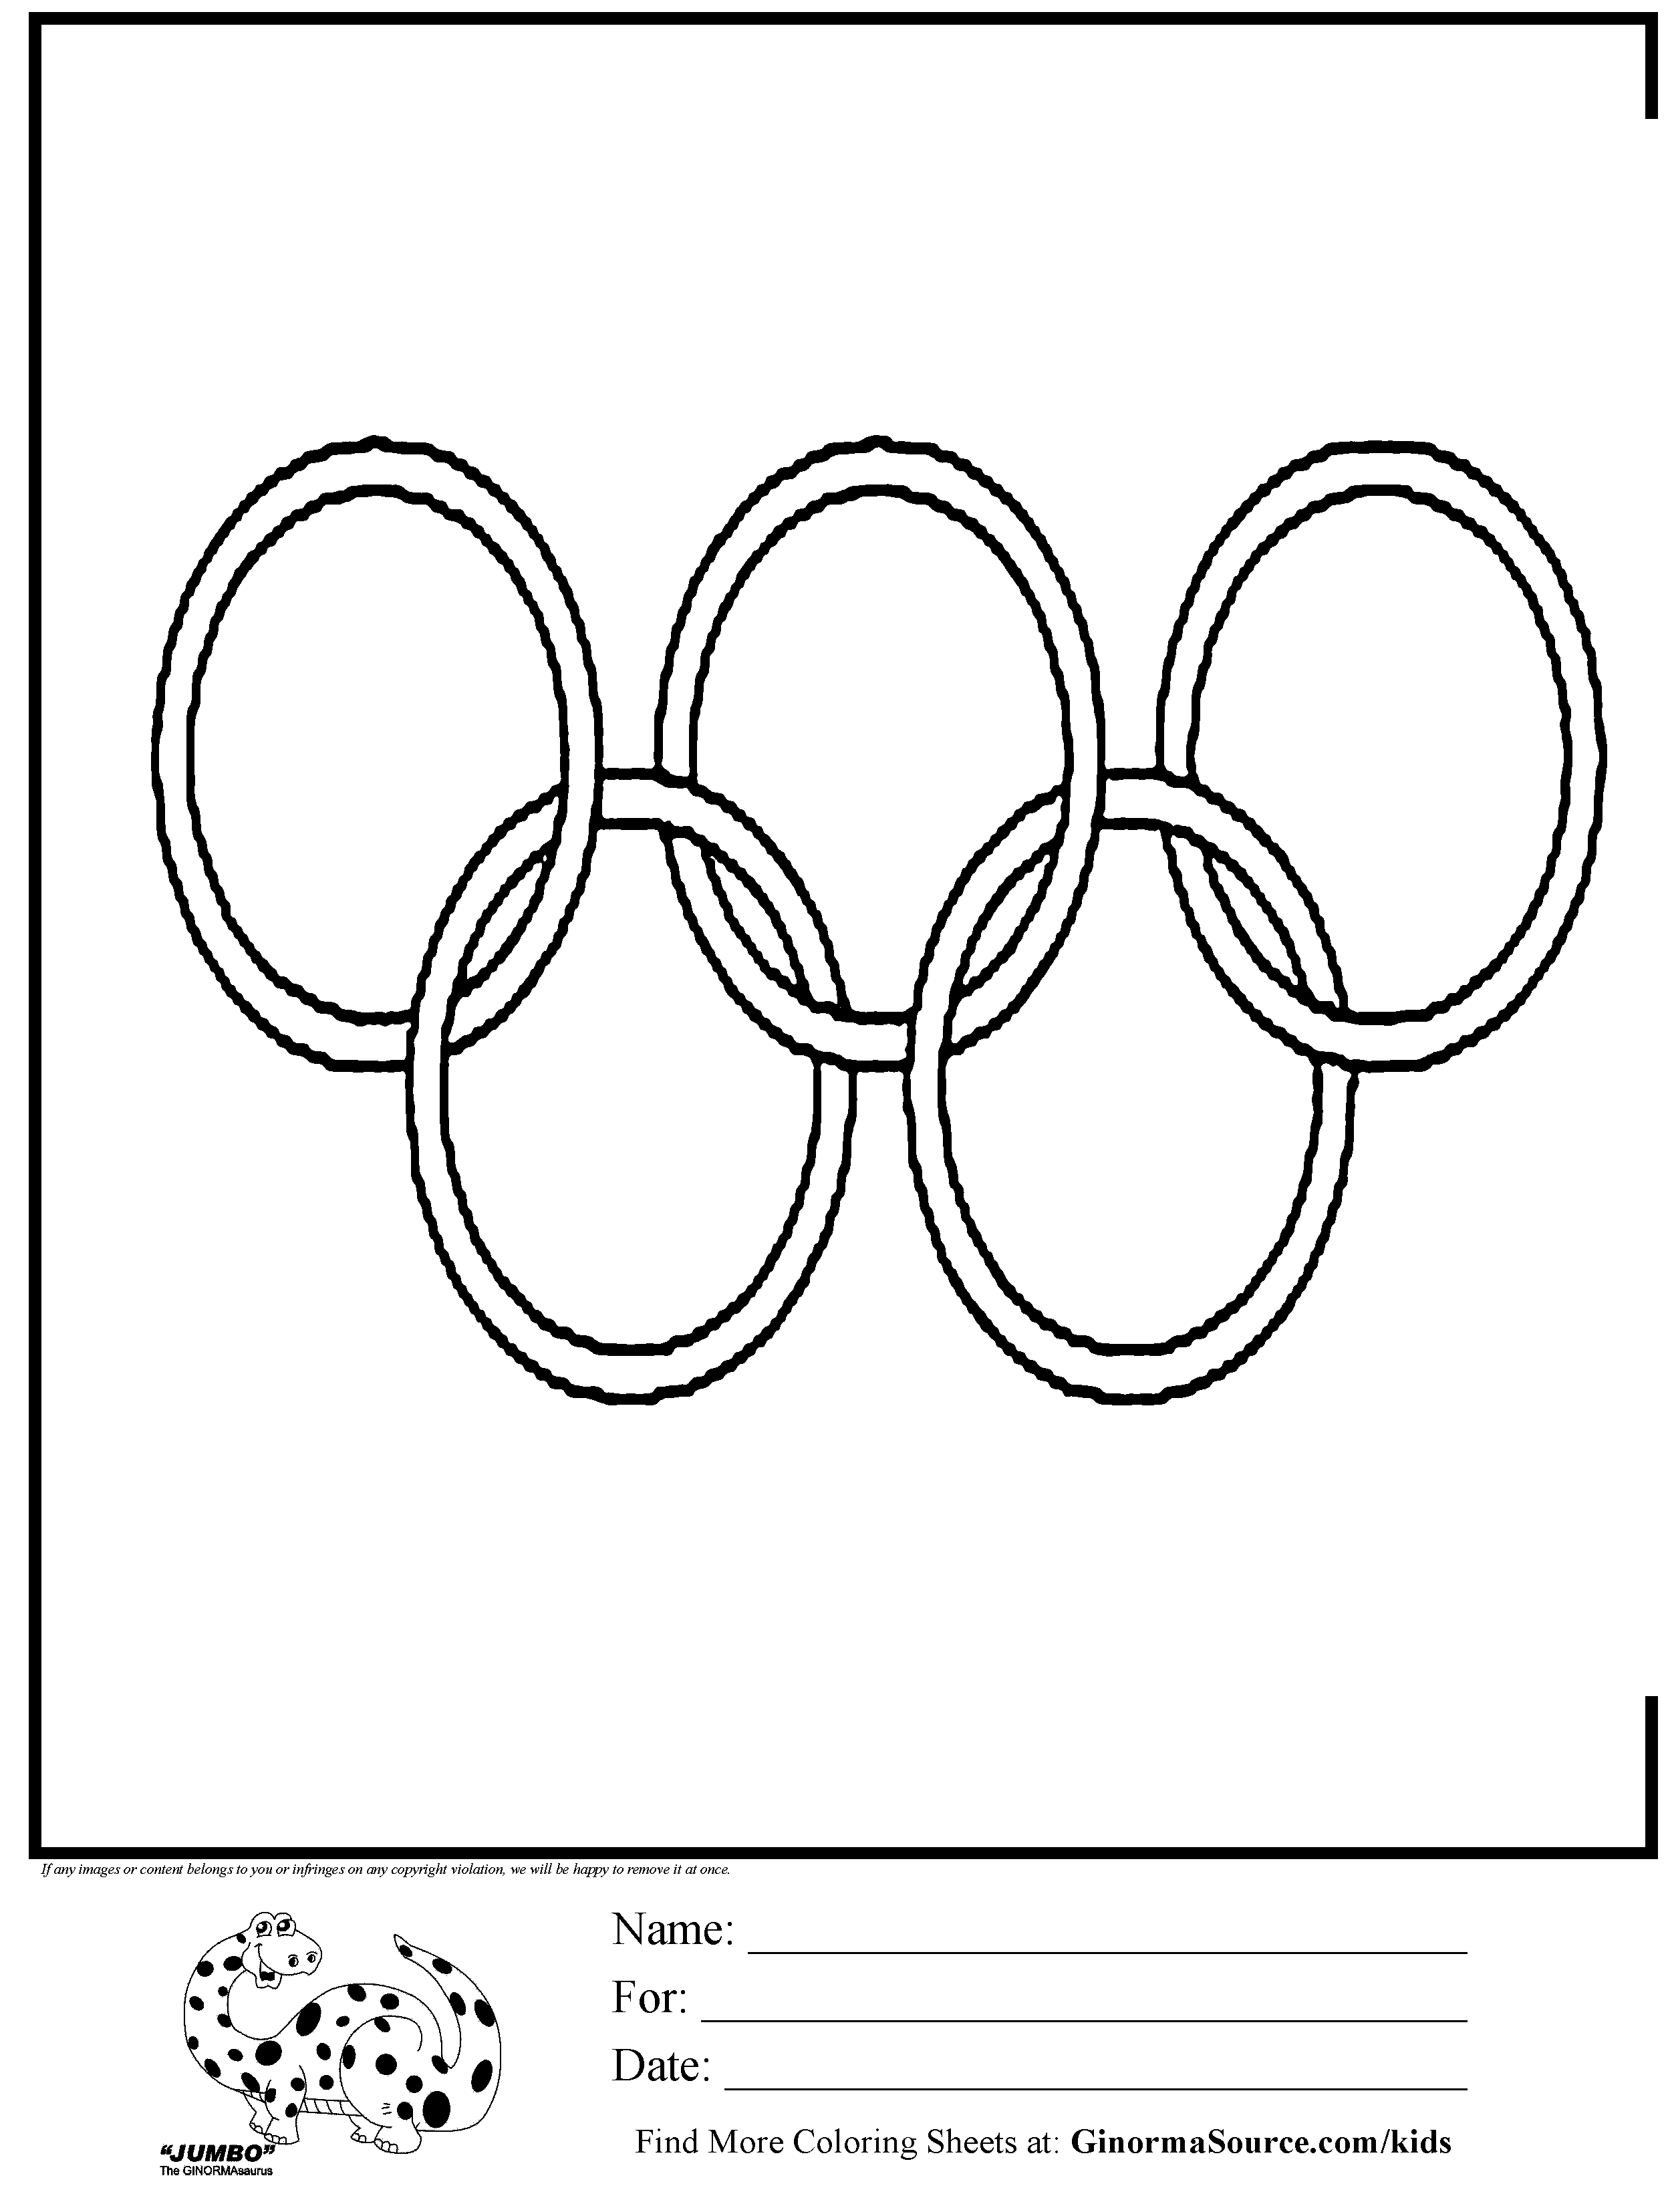 winterspelen-olympic-rings-free-coloring-pages-free-coloring